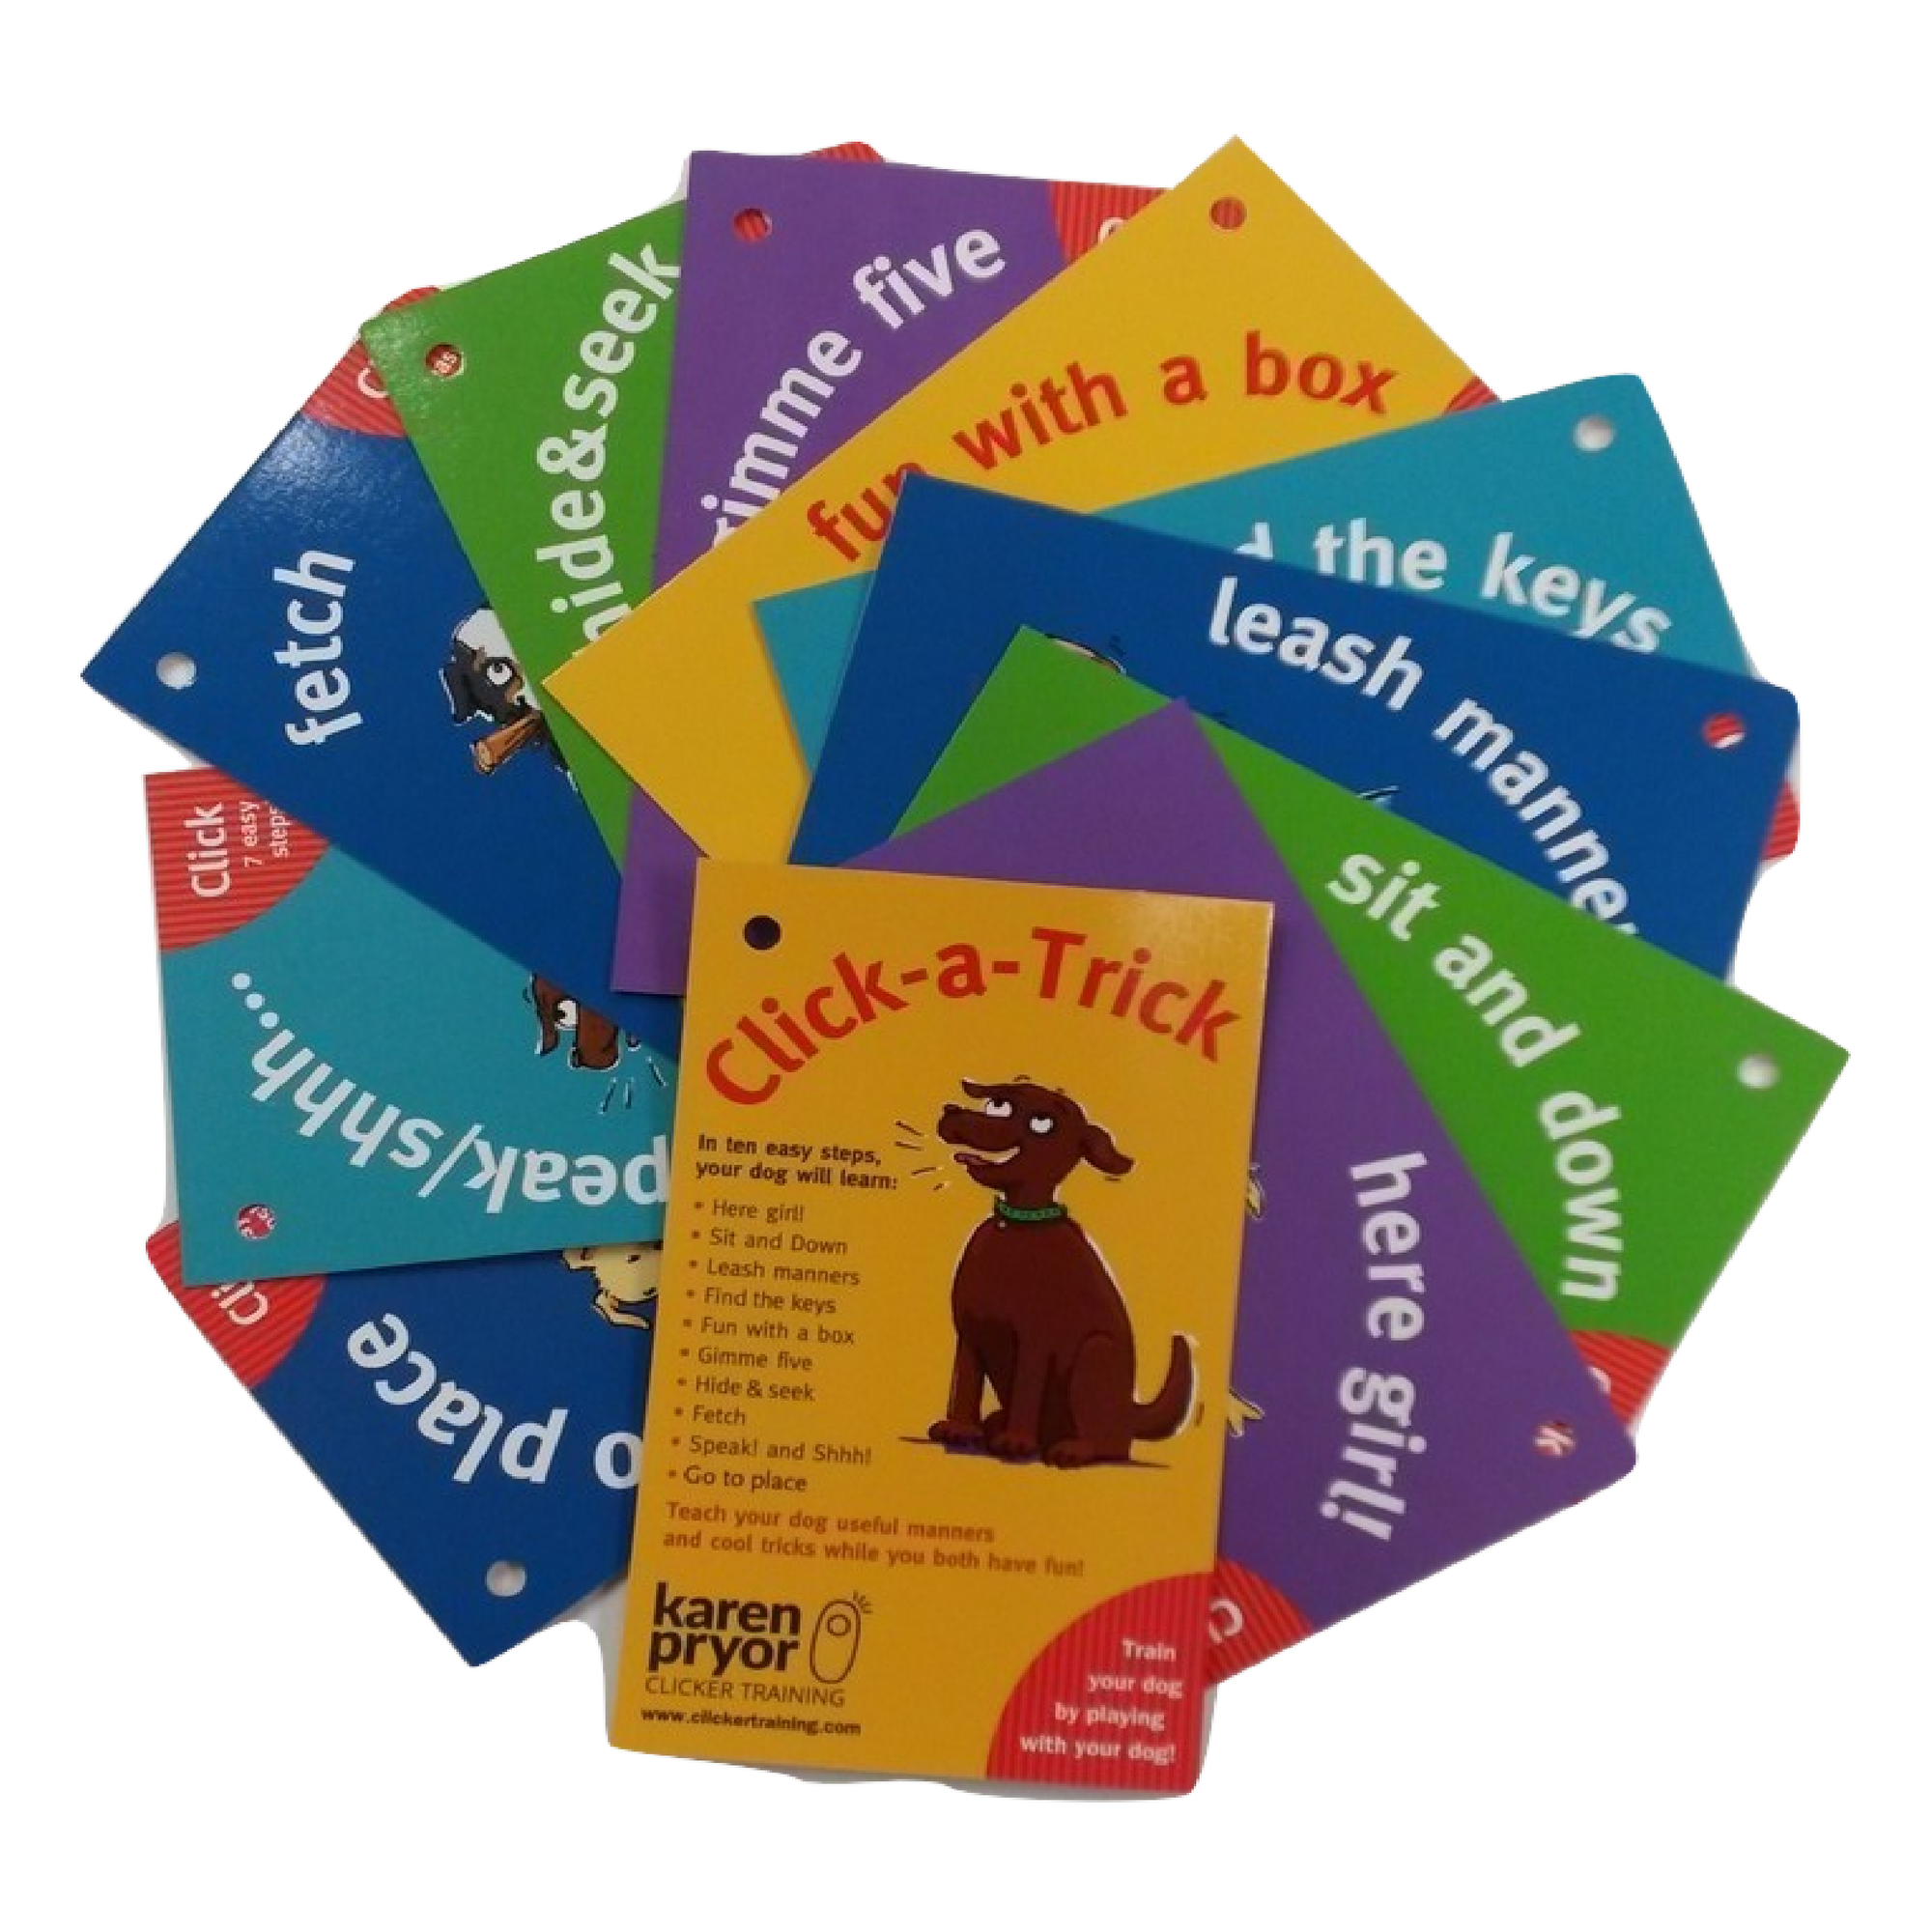 New & Improved! Click-A-Trick Cards